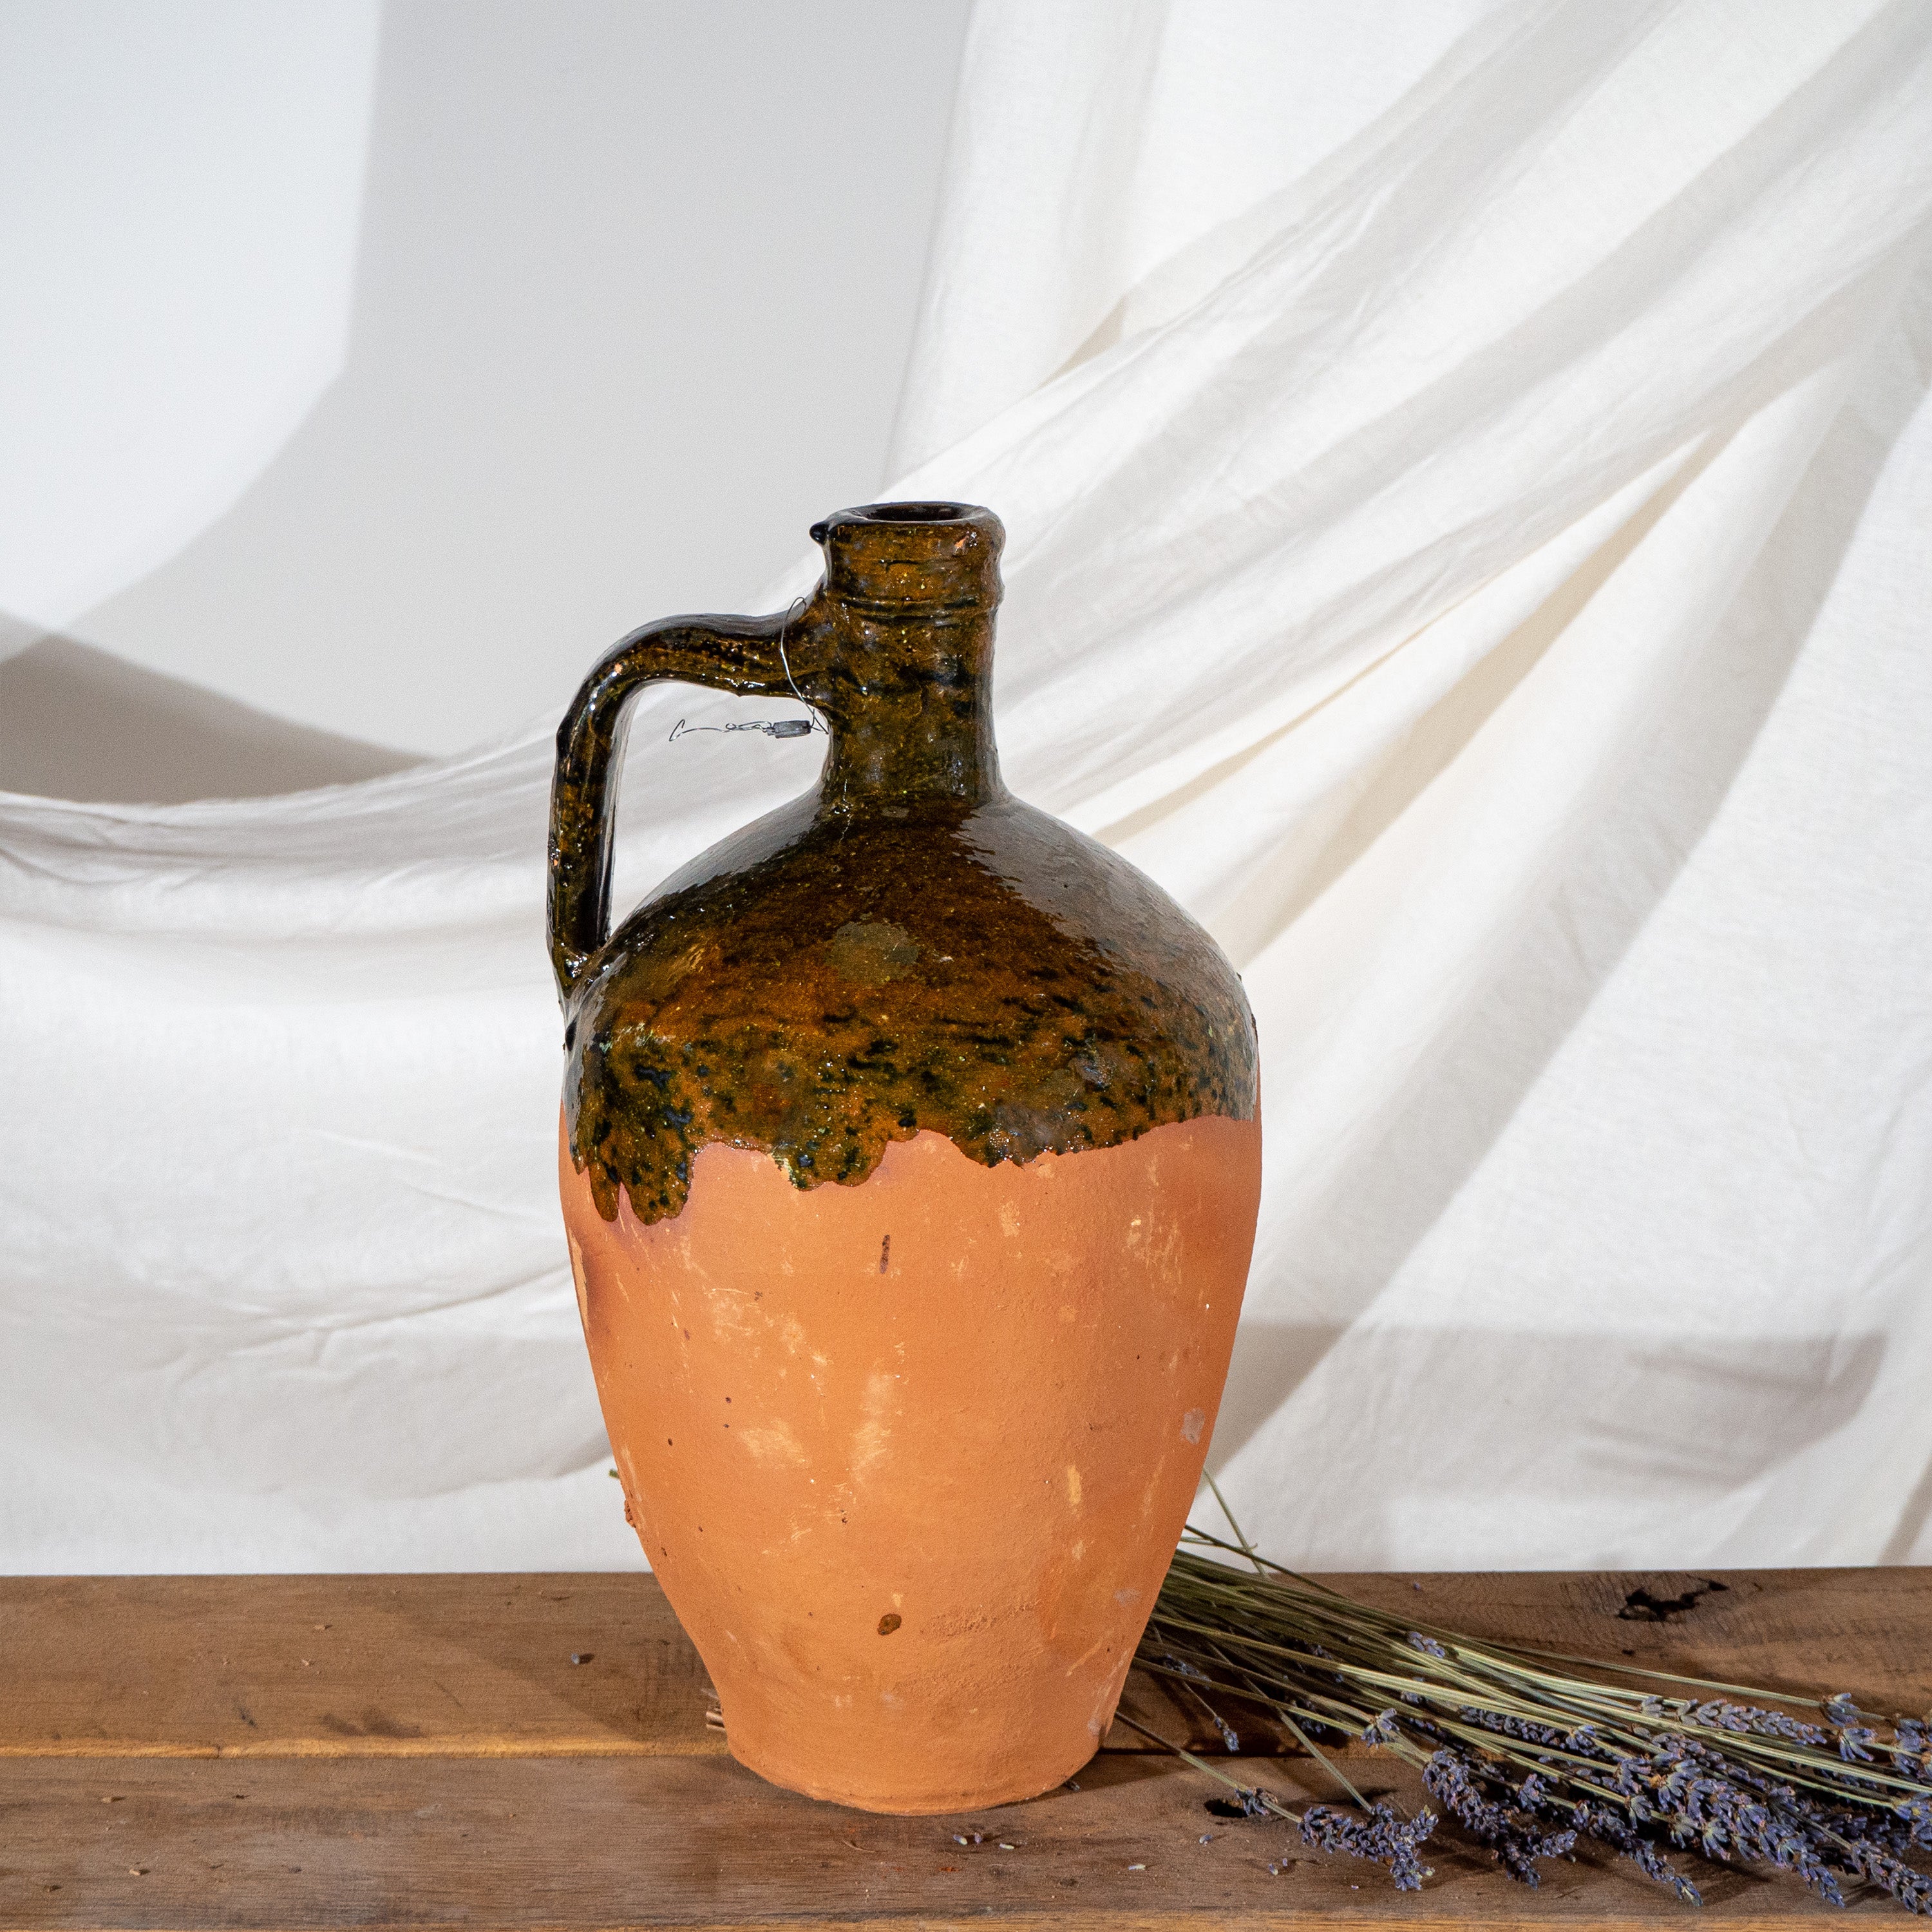 Single handled glazed terracotta Turkish jug with spout on vintage wooden bench with dried lavendar